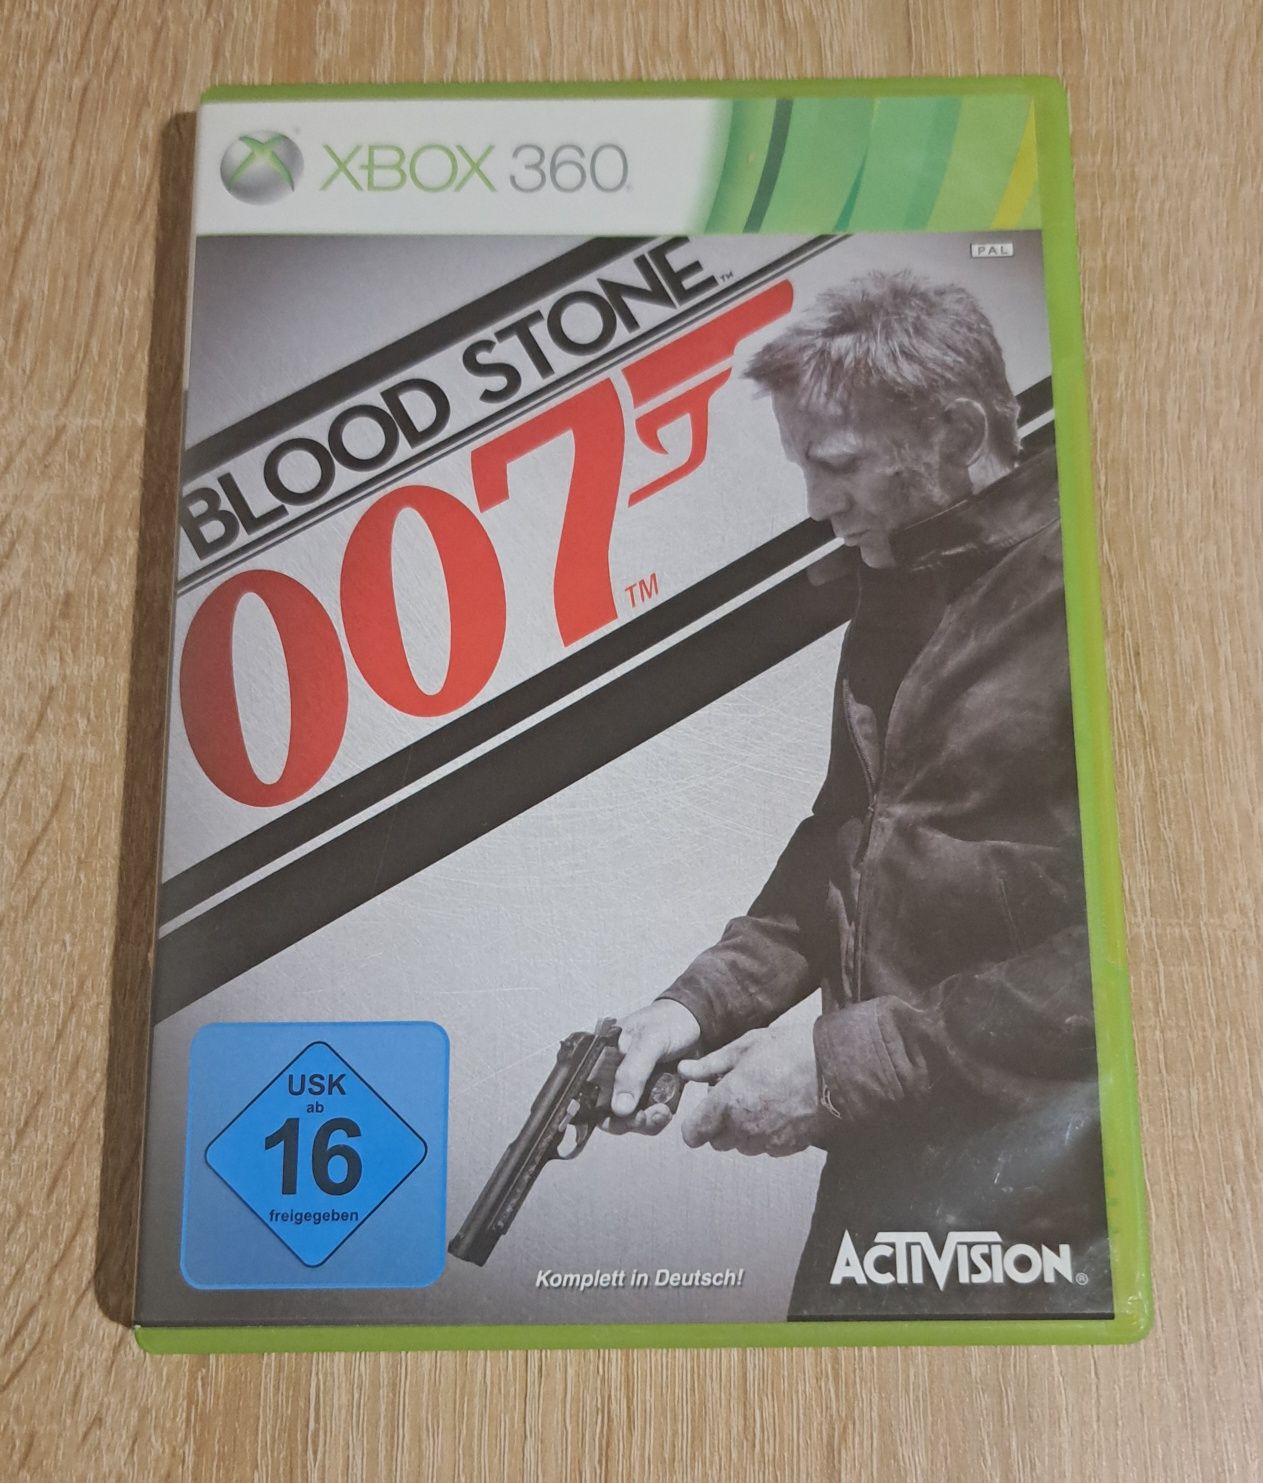 Gra Bloodstone 007 Blood Stone Xbox 360 ANG Komplet